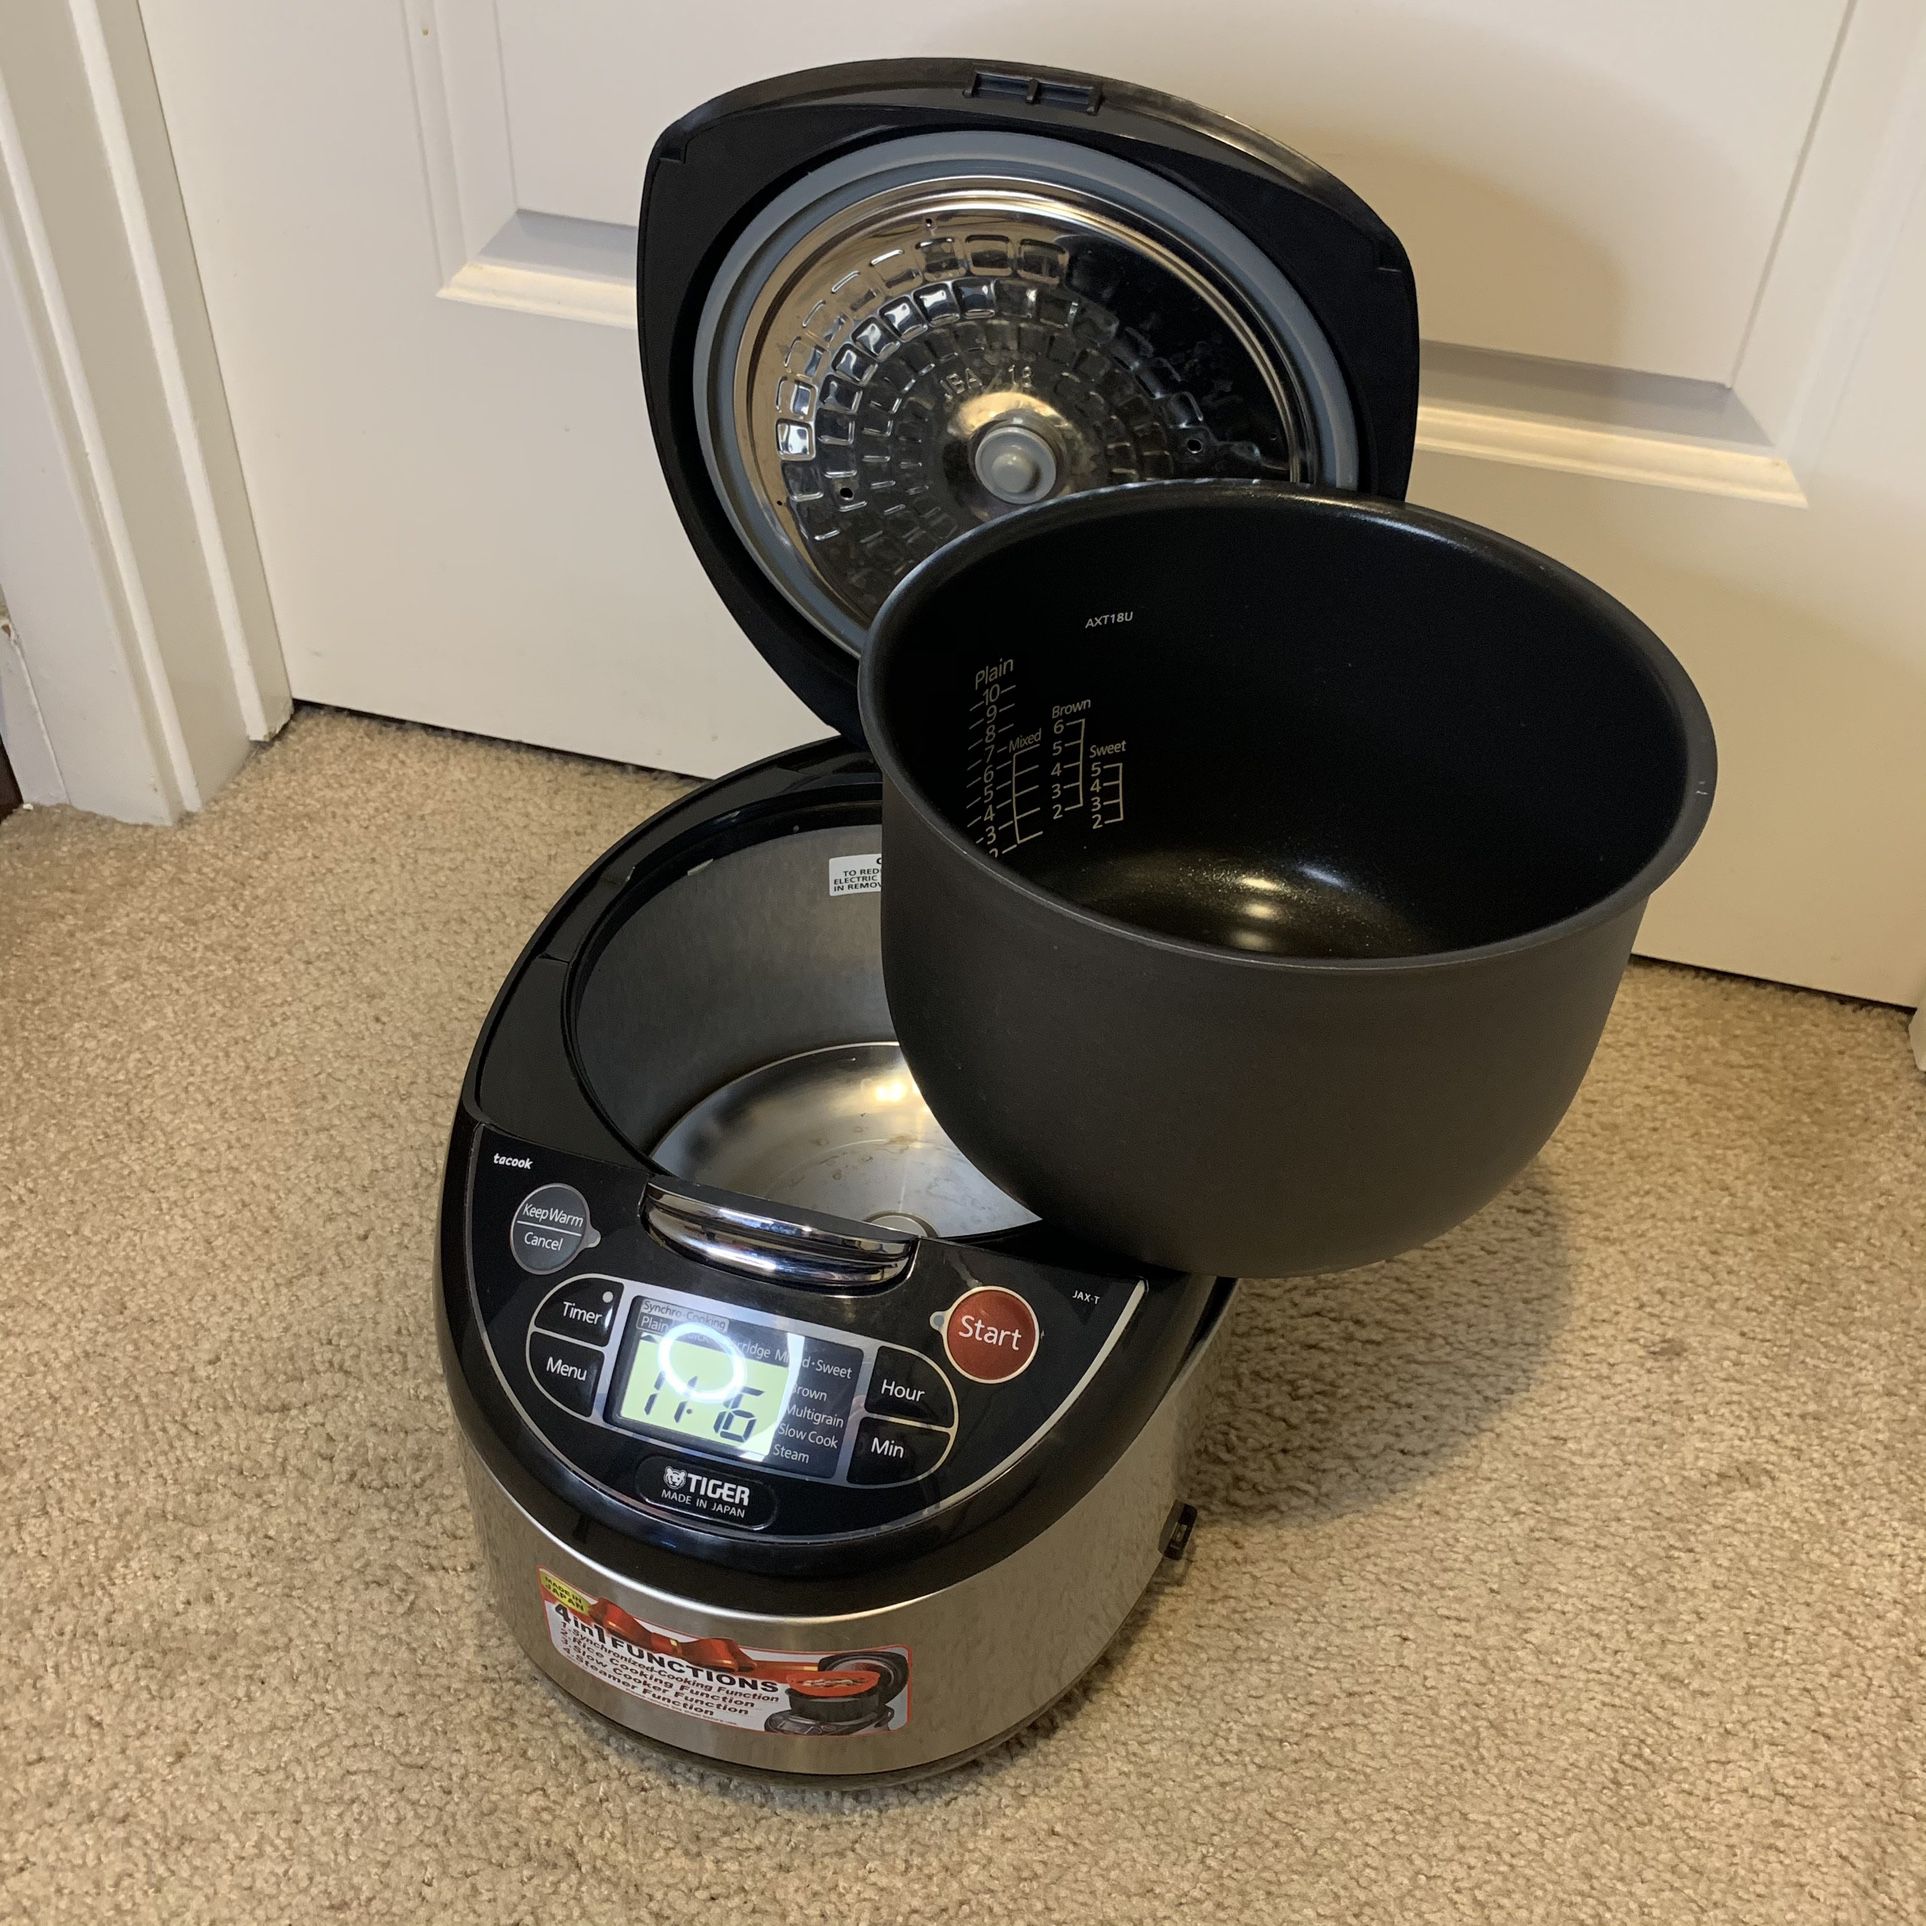 Tiger Tacook Rice Cooker For Sale In San Jose Ca Offerup